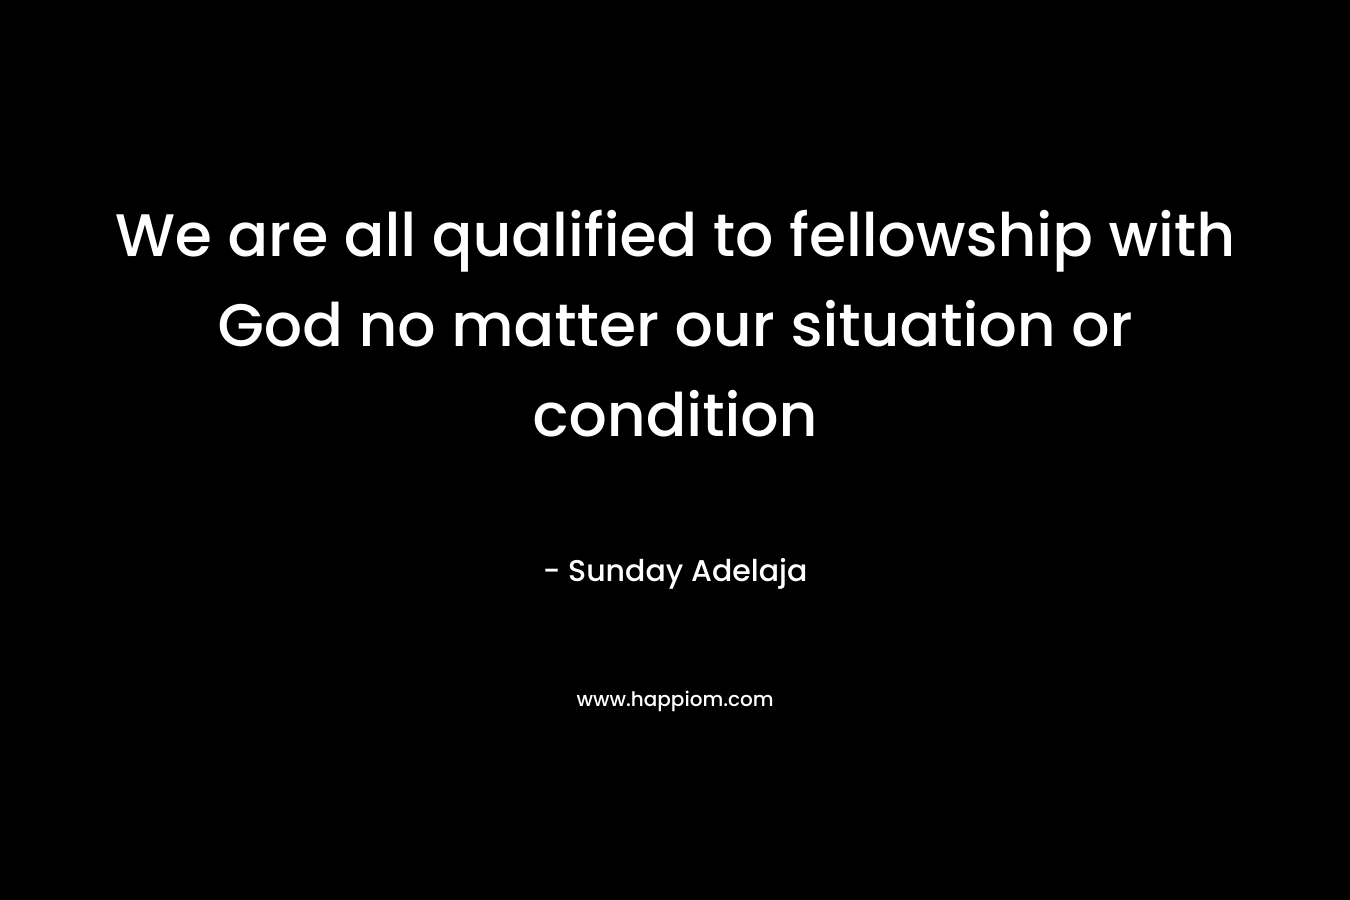 We are all qualified to fellowship with God no matter our situation or condition